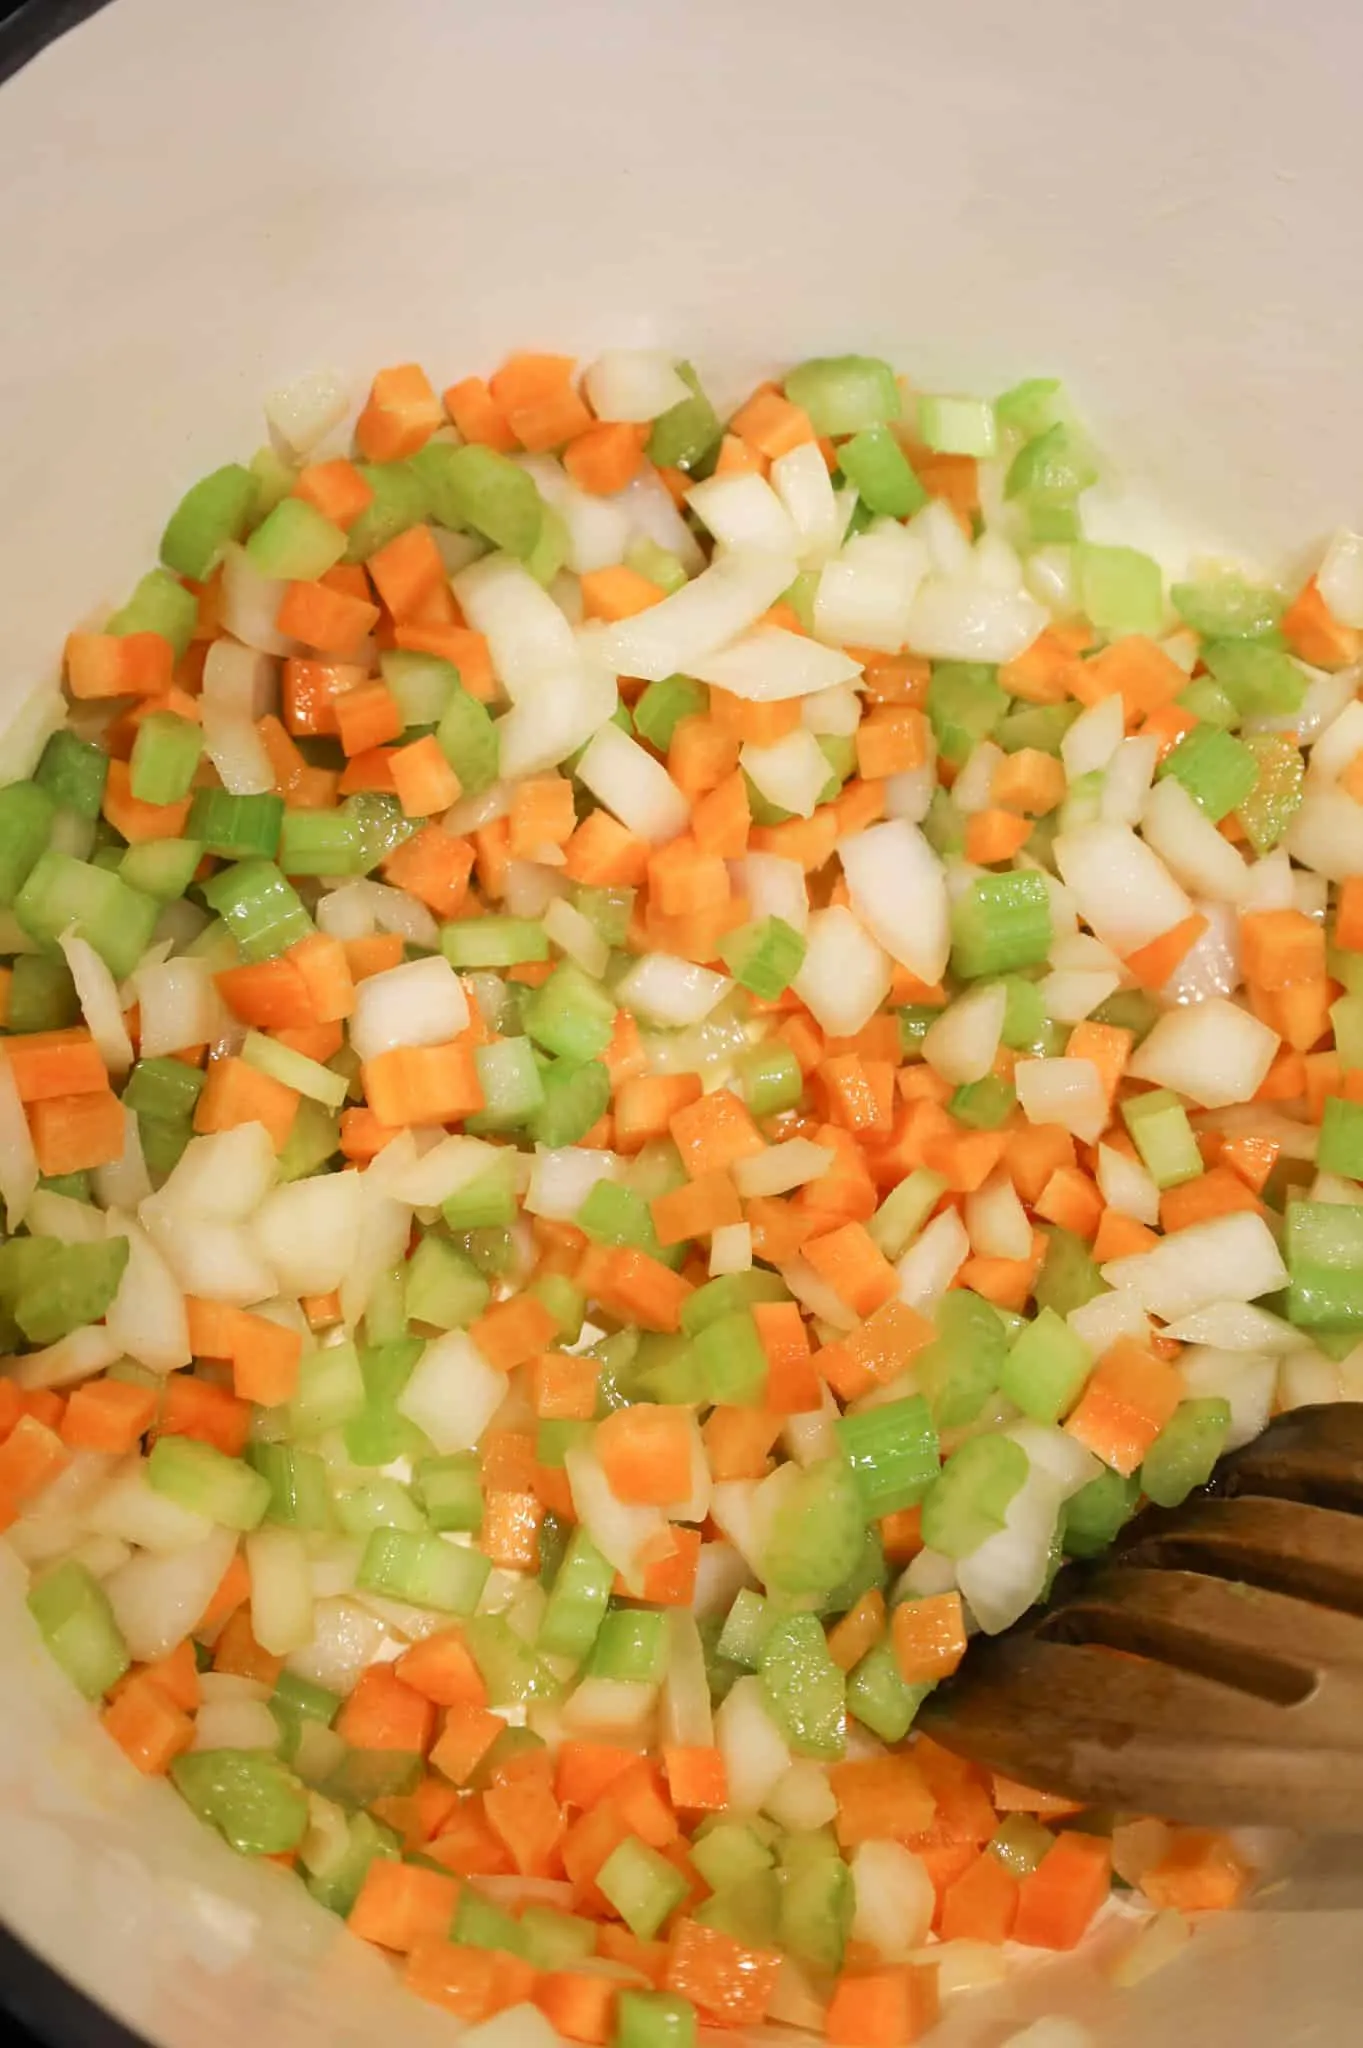 diced onions, carrots and celery being stirred in a pot